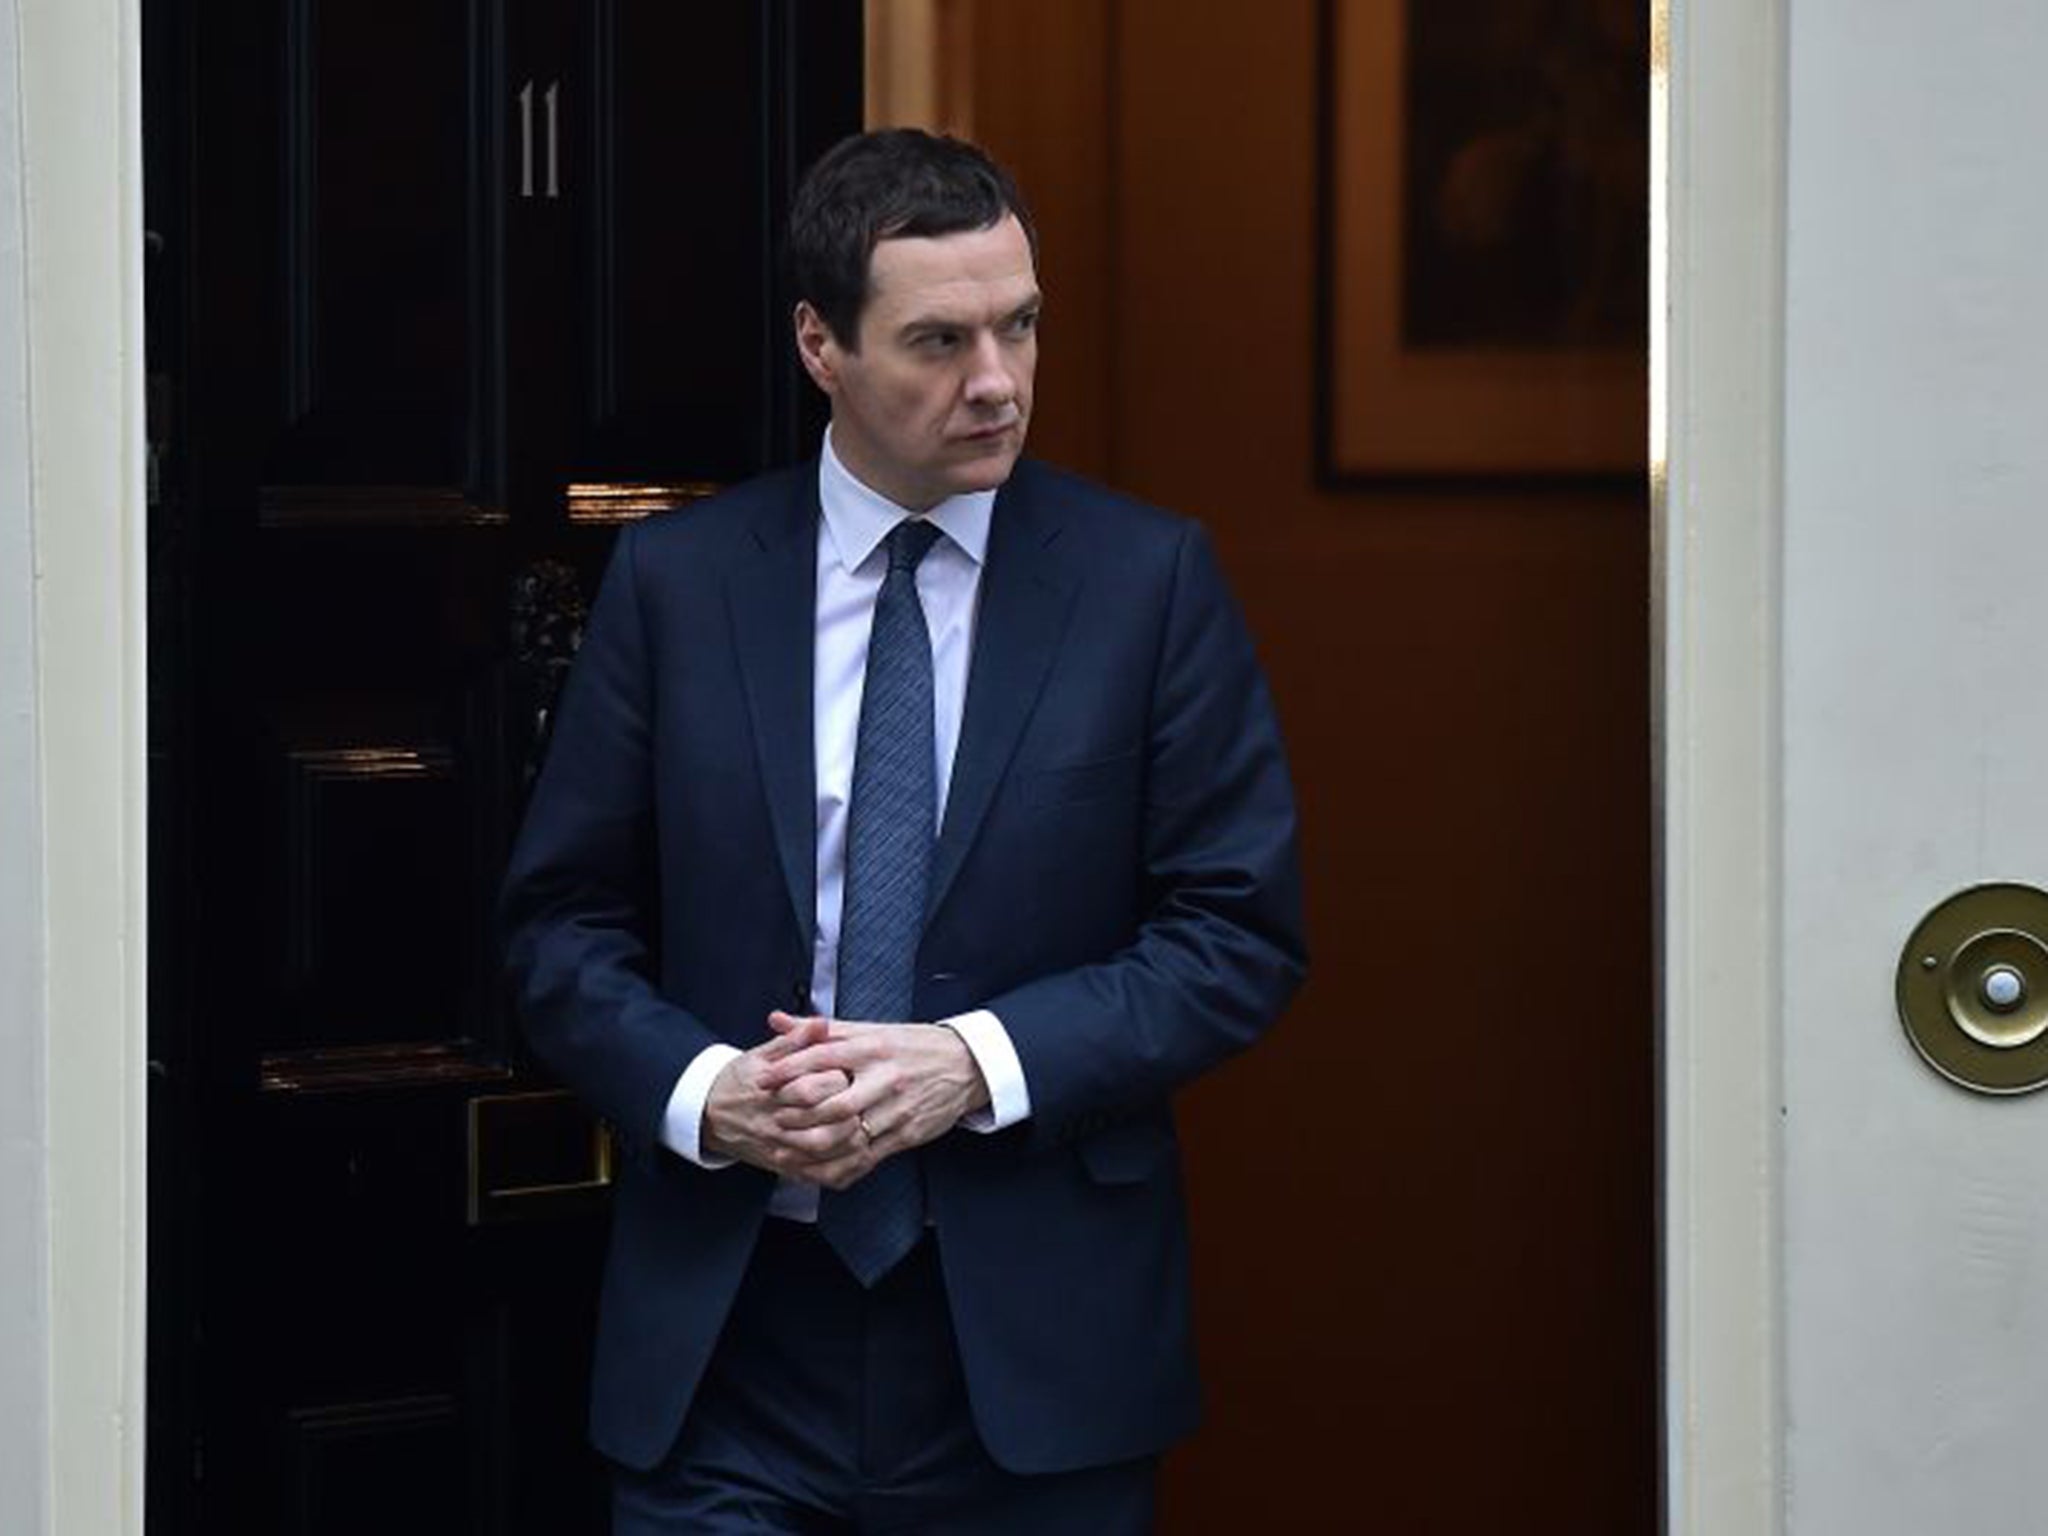 Chancellor George Osborne will wish to present himself in the most prime ministerial light